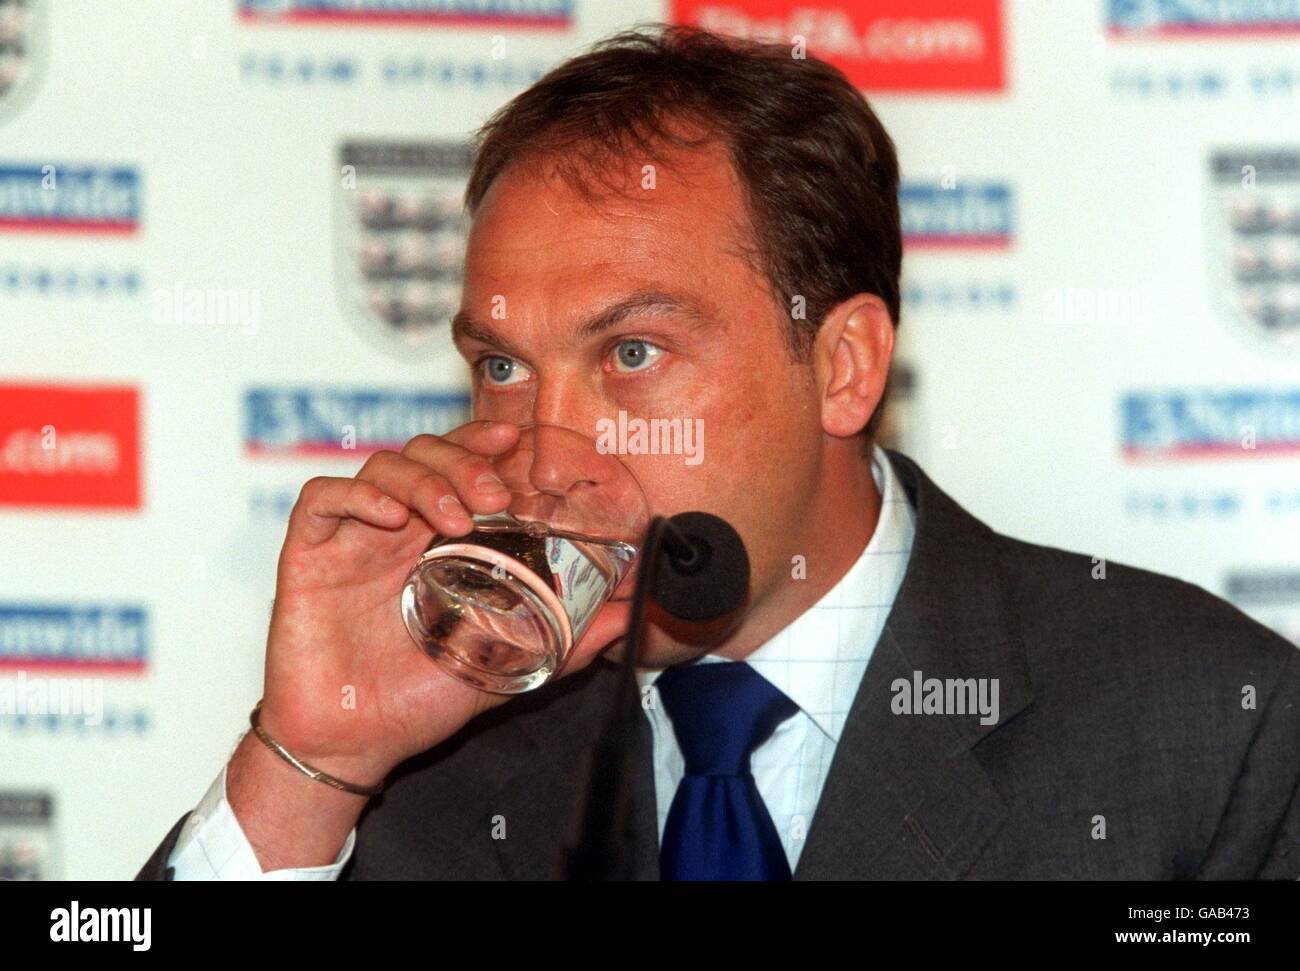 Soccer - England Press Conference - England's World Cup Squad Announcement. England Under 21 Manager David Platt has a sip of water Stock Photo